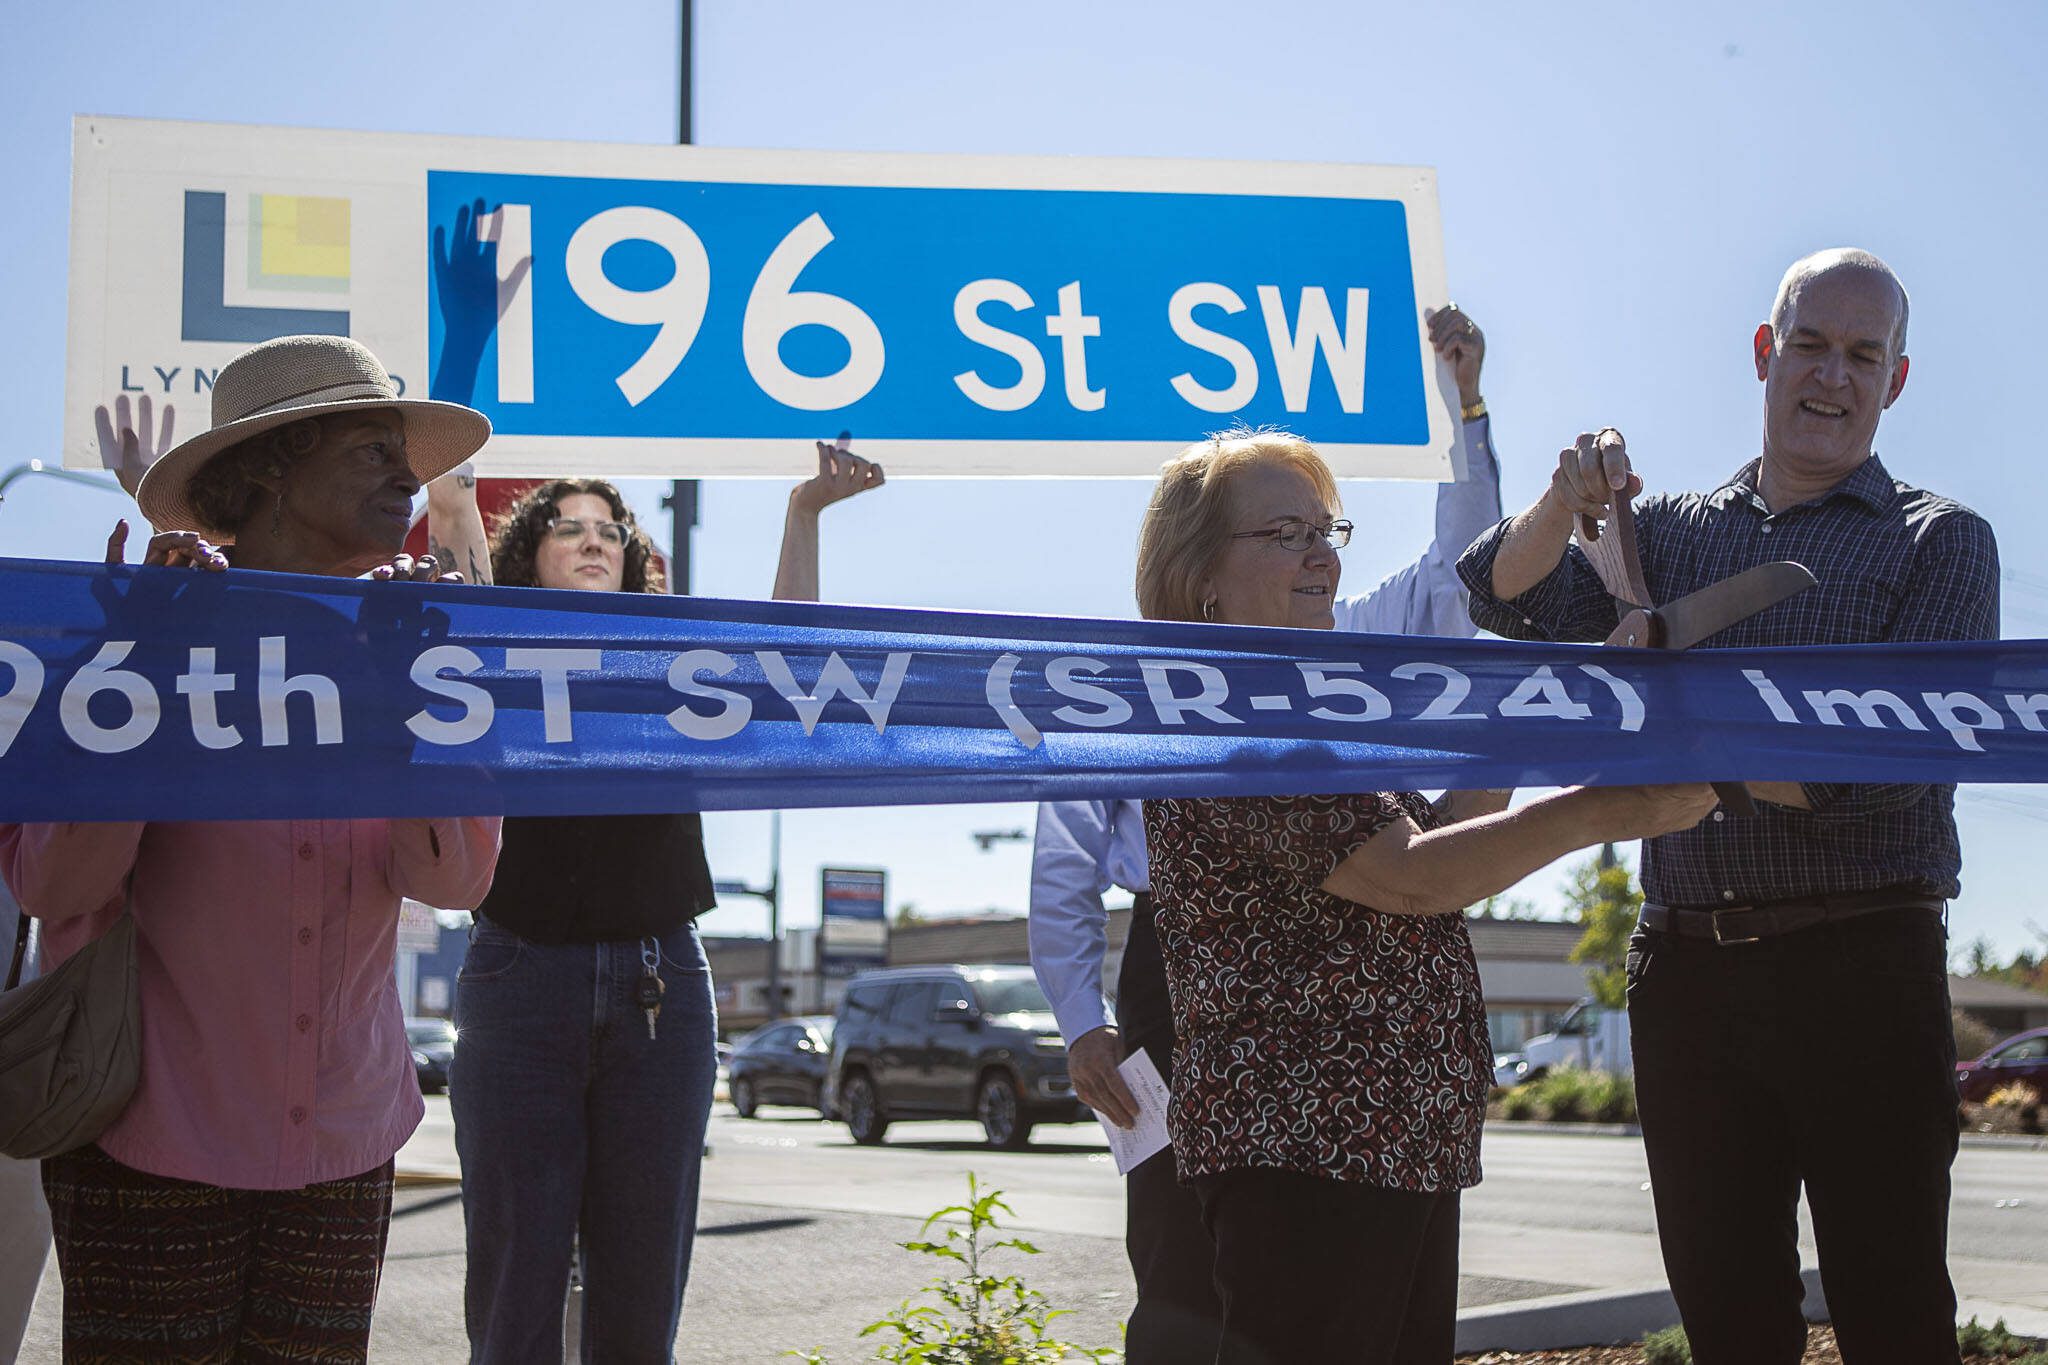 Lynnwood Mayor Christine Frizzell, second from right, and Rep. Rick Larsen, right, cut a ribbon during a ceremony to celebrate the completion of the 196th Street SW Improvement Project near the 196th and 44th Ave West intersection in Lynnwood, Washington on Tuesday, Aug. 15, 2023. (Annie Barker / The Herald)